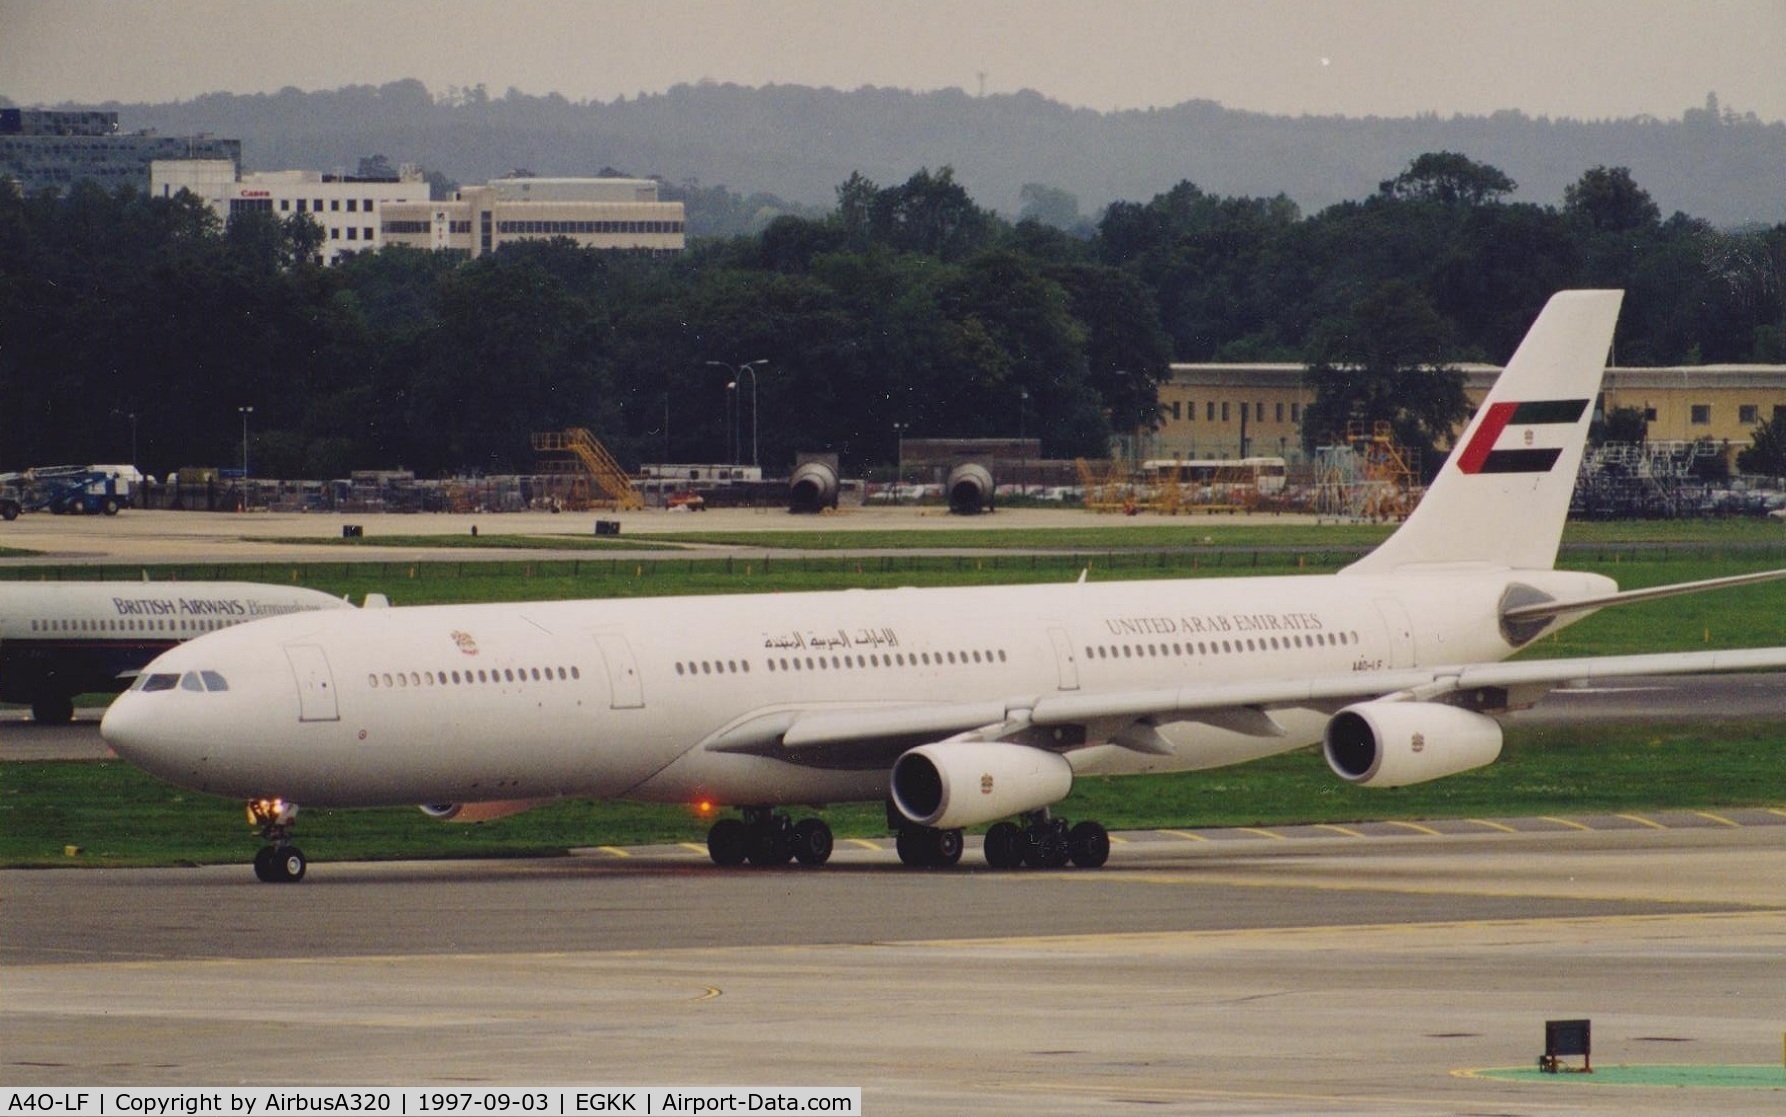 A4O-LF, 1996 Airbus A340-312 C/N 133, Seen at Gatwick whilst leased to UAE